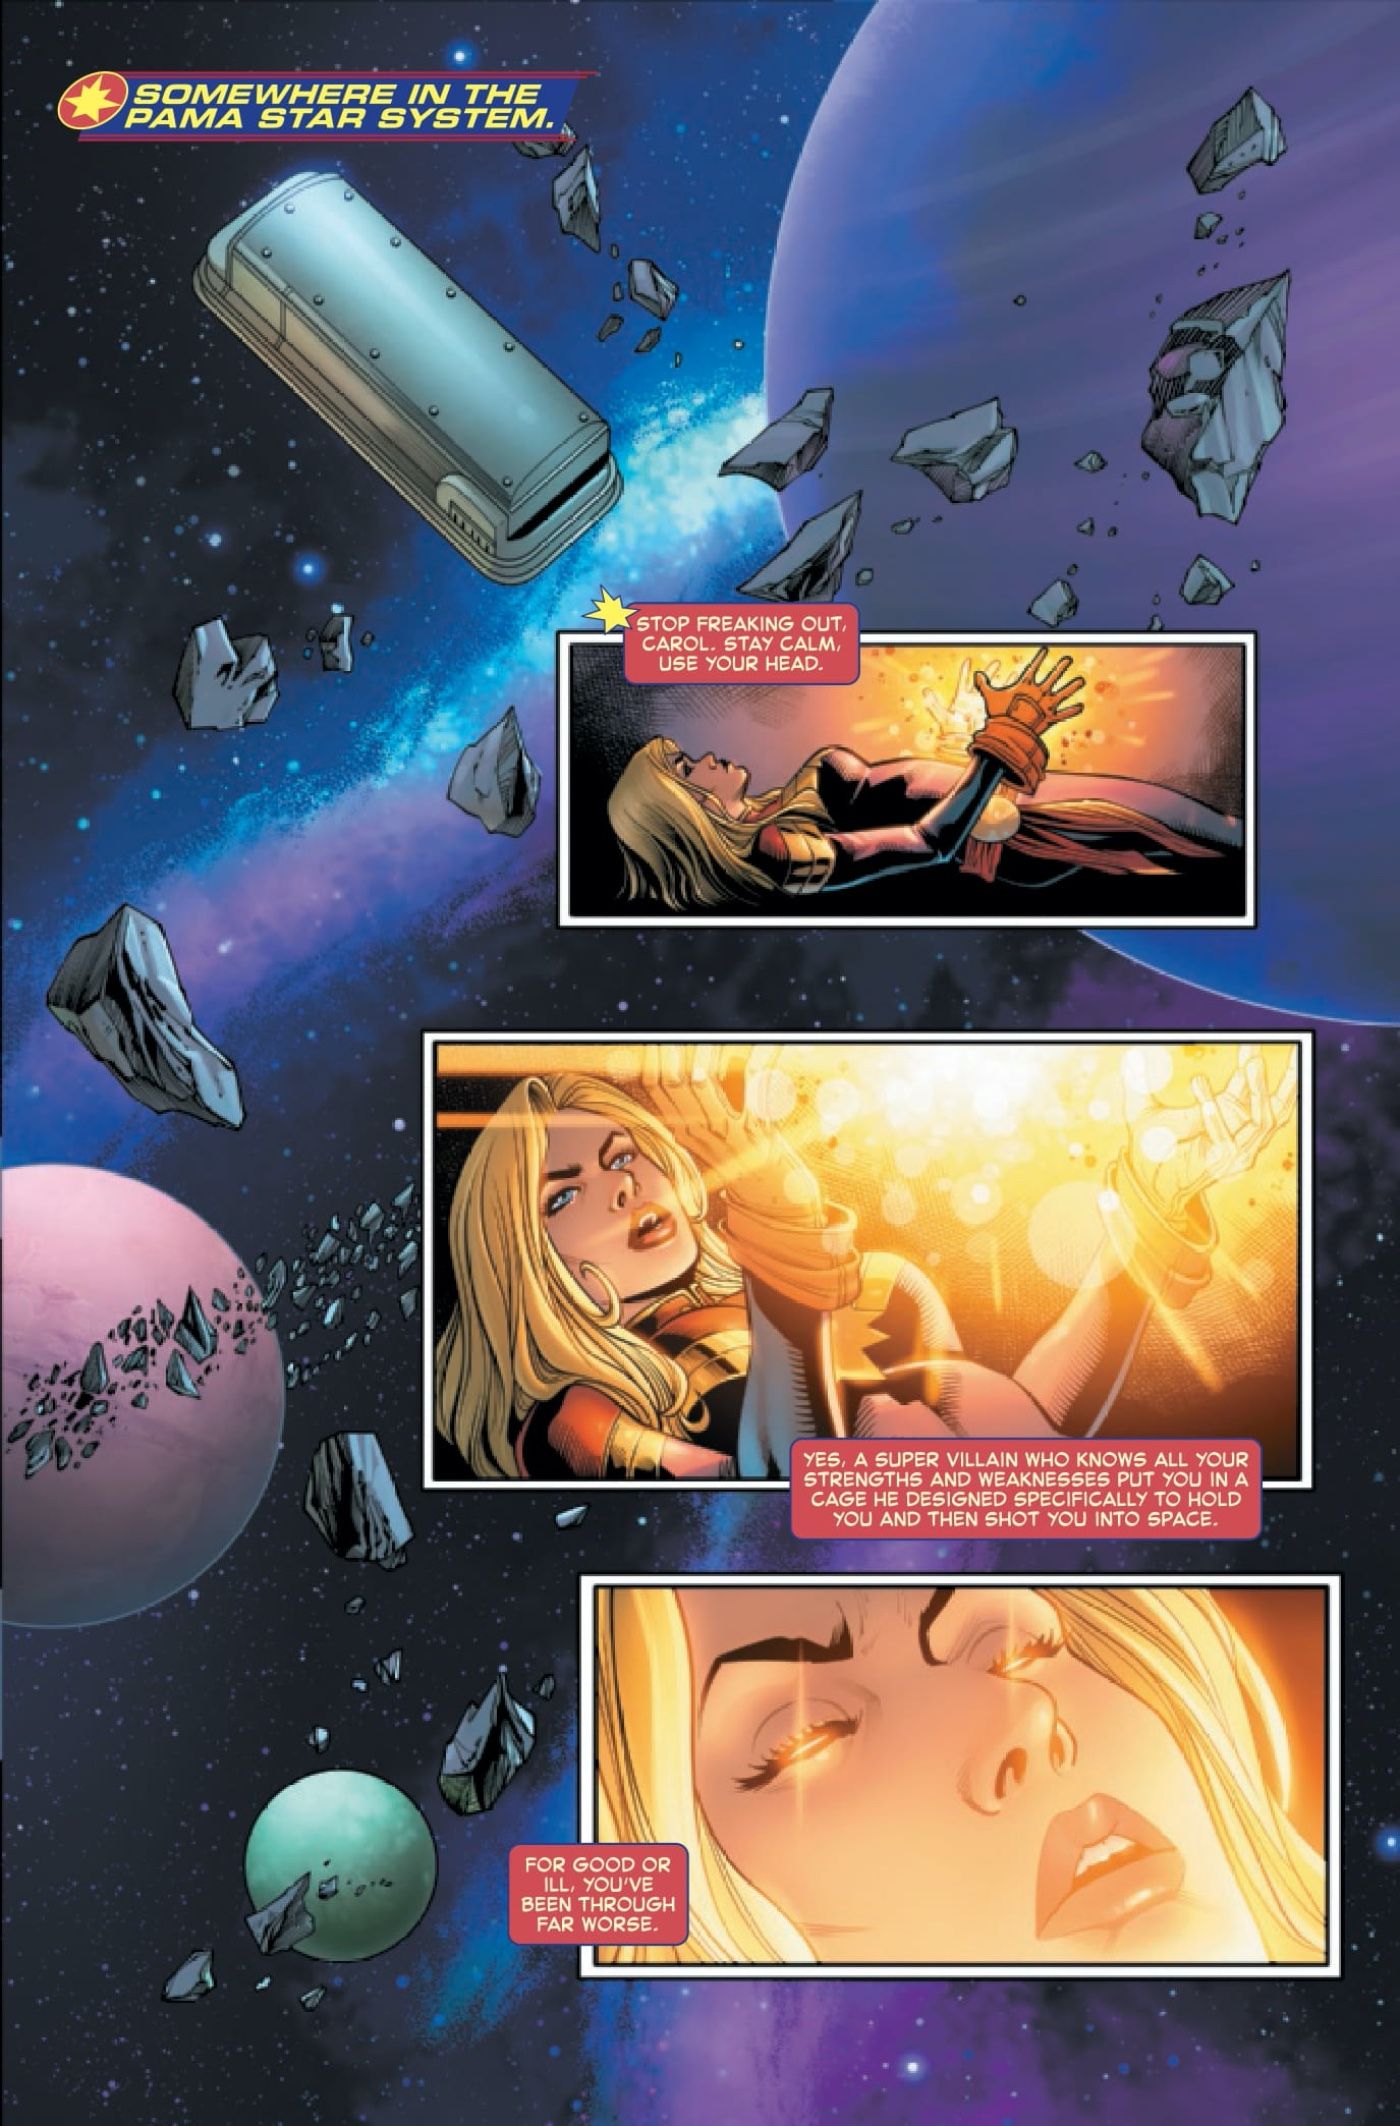 Captain Marvel 34 preview page, showing Carol floating through space in a cage